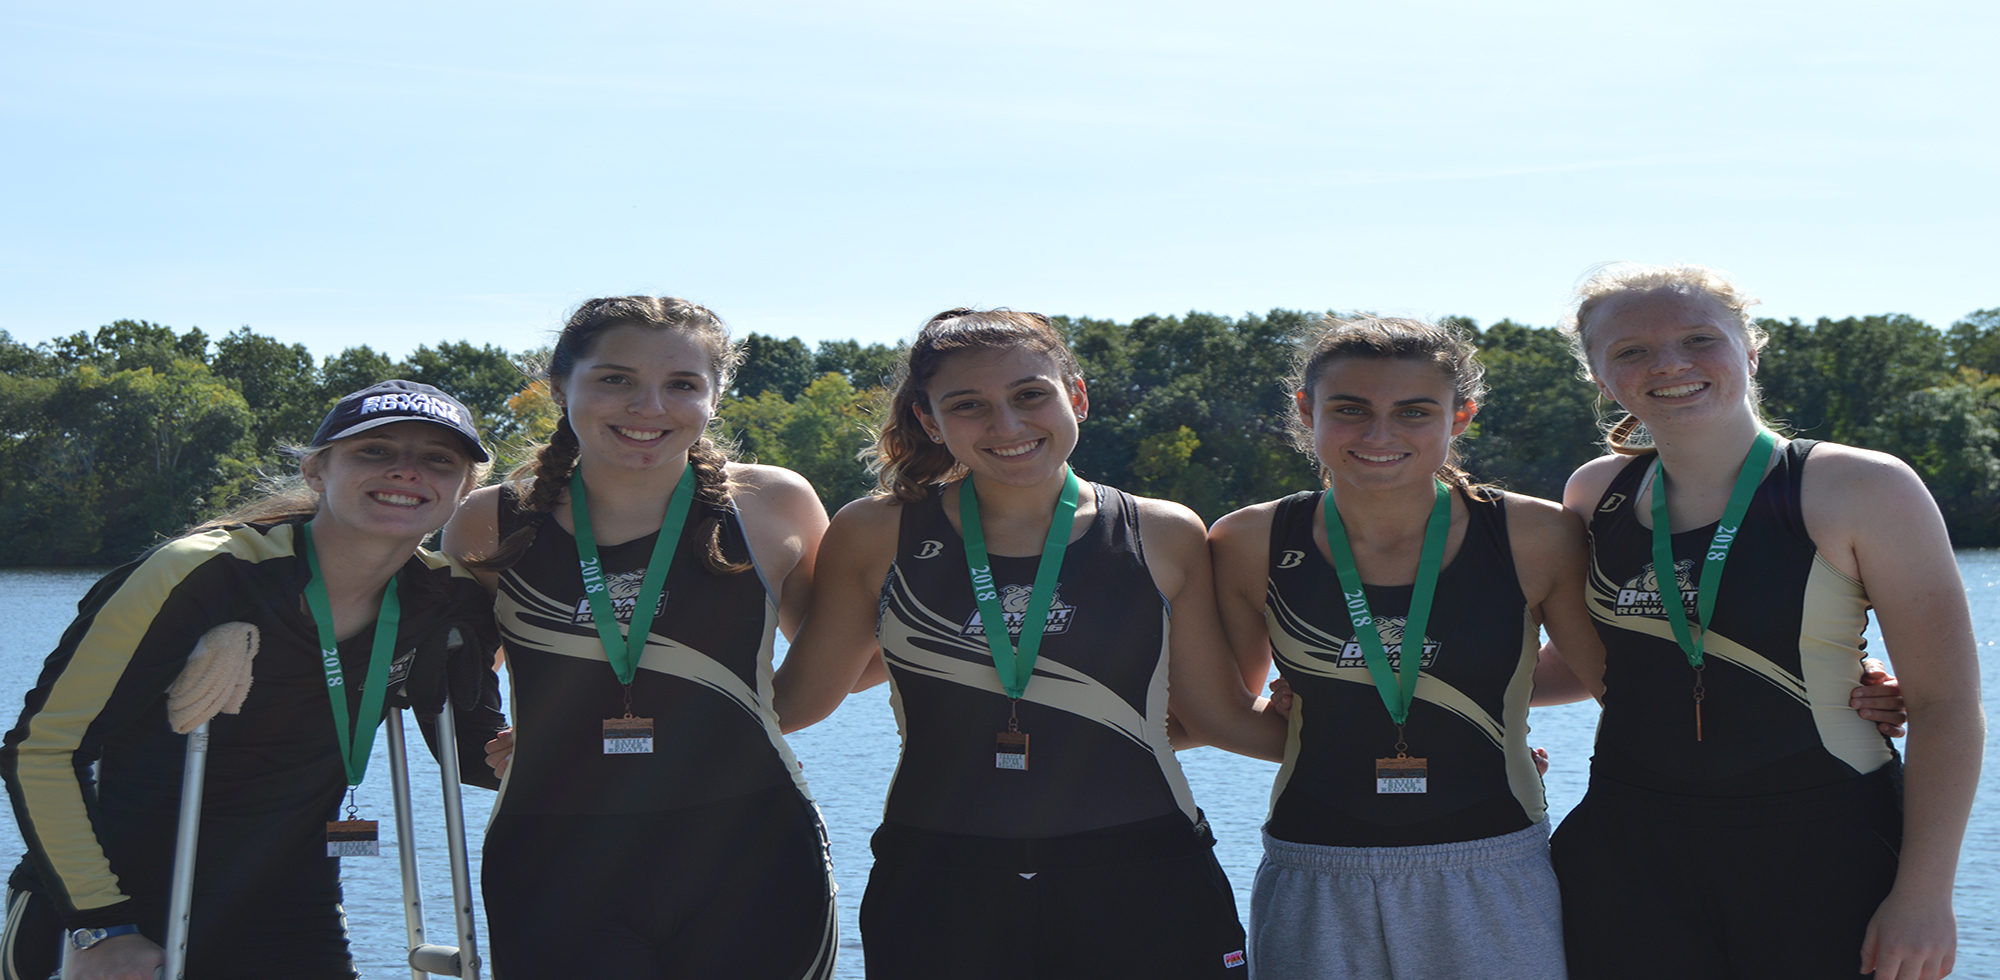 FIRST FALL REGATTA PAVES THE WAY FOR A GREAT SEASON AHEAD